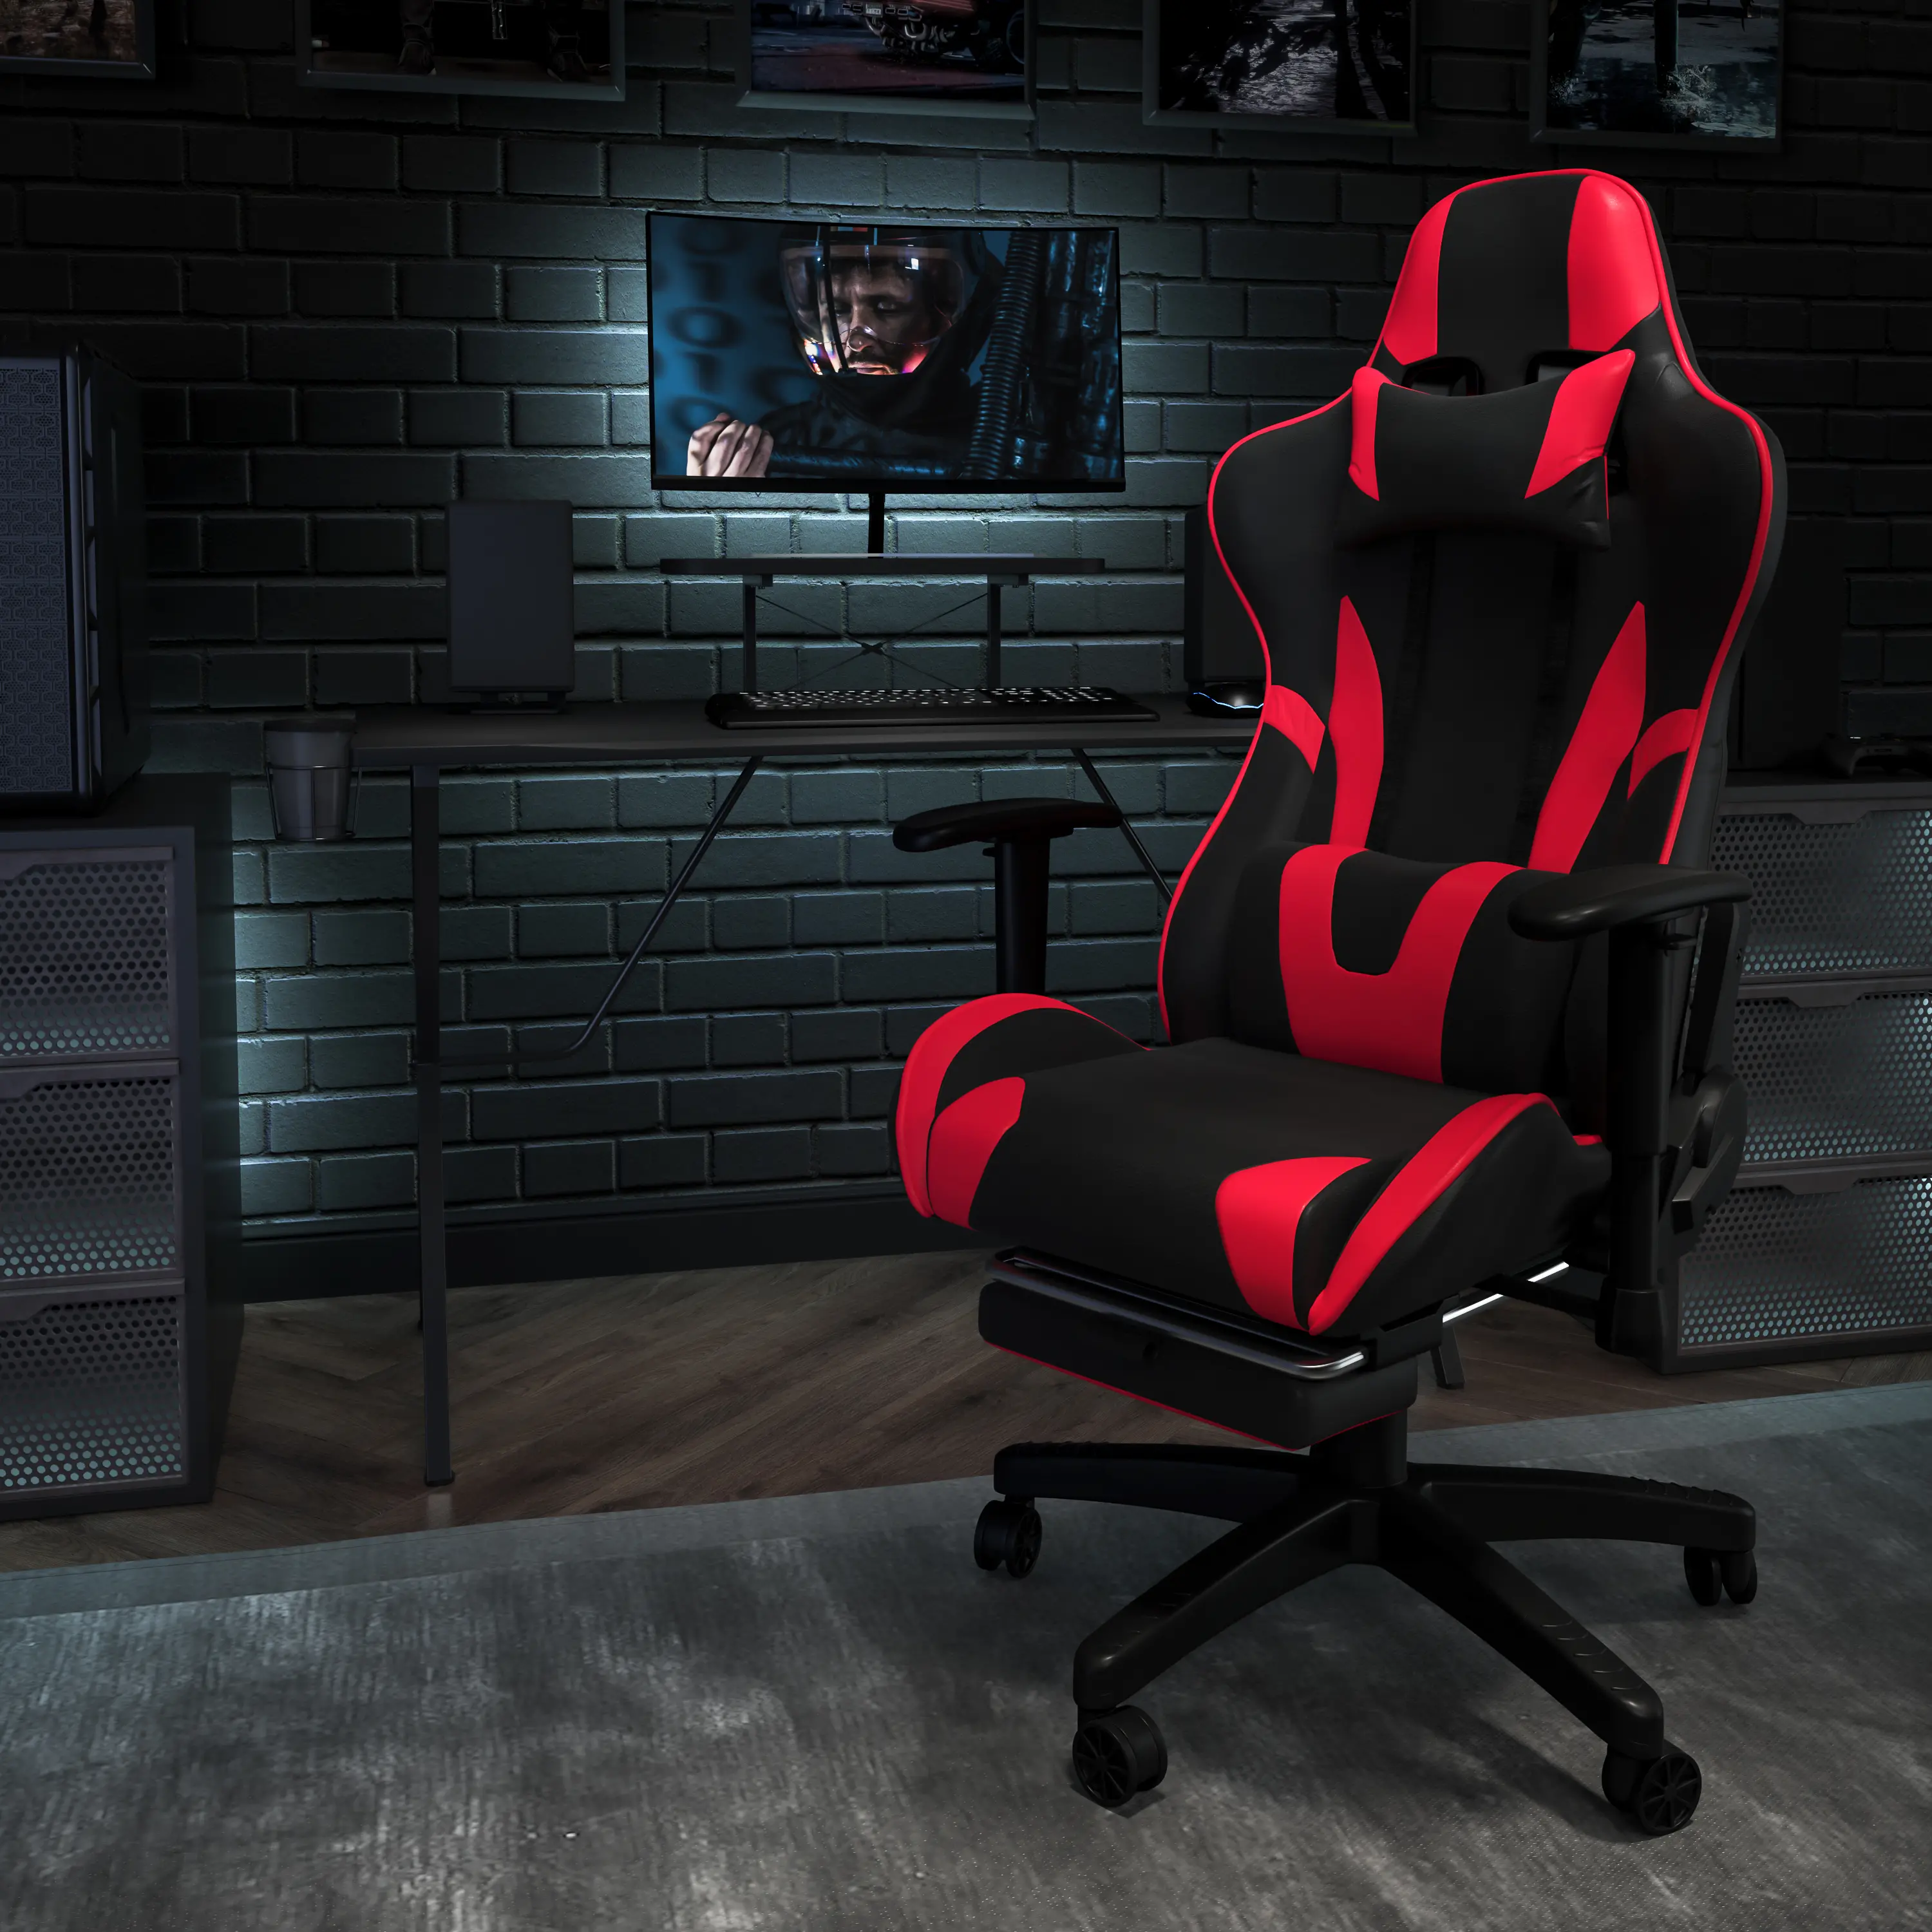 https://static.rcwilley.com/products/112374387/X30-Red-and-Black-Gaming-Swivel-Chair-rcwilley-image1.webp